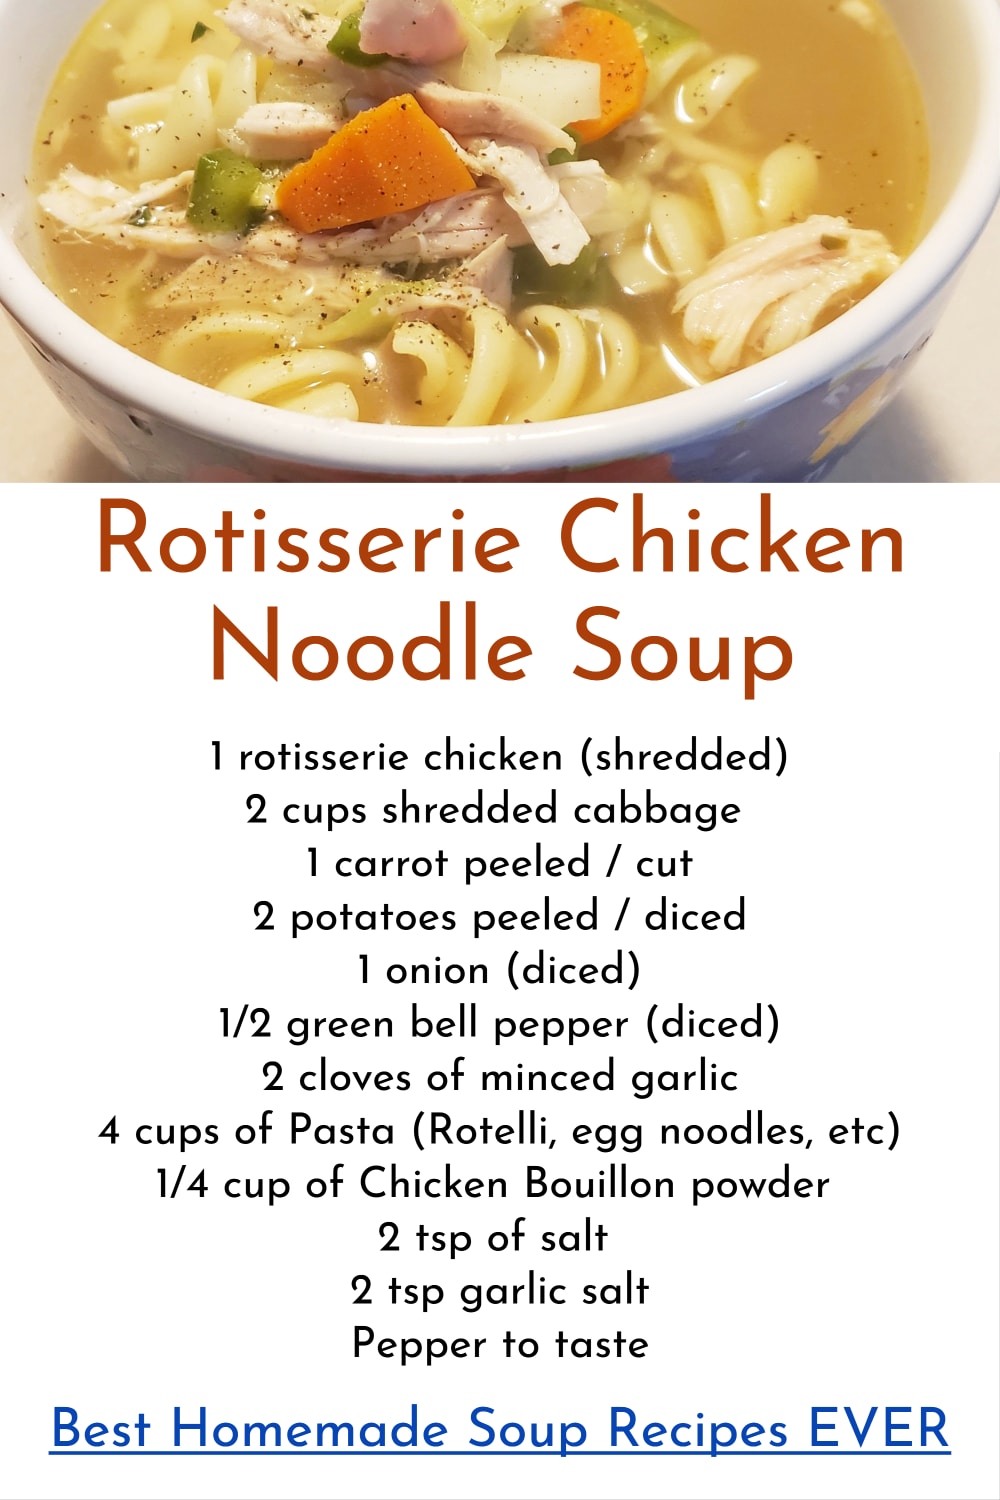 Chicken soup ingredients and procedure - Homemade Chicken Noodle Soup Recipe from scratch made with Rotisserie Chicken, leftover chicken or chicken breasts (a unique chicken soup recipe with few ingredients). This is a FAST chicken noodle soup recipe with cabbage, carrots, potatoes, onion, green pepper, pasta noodles and garlic - best homemade soup recipes EVER